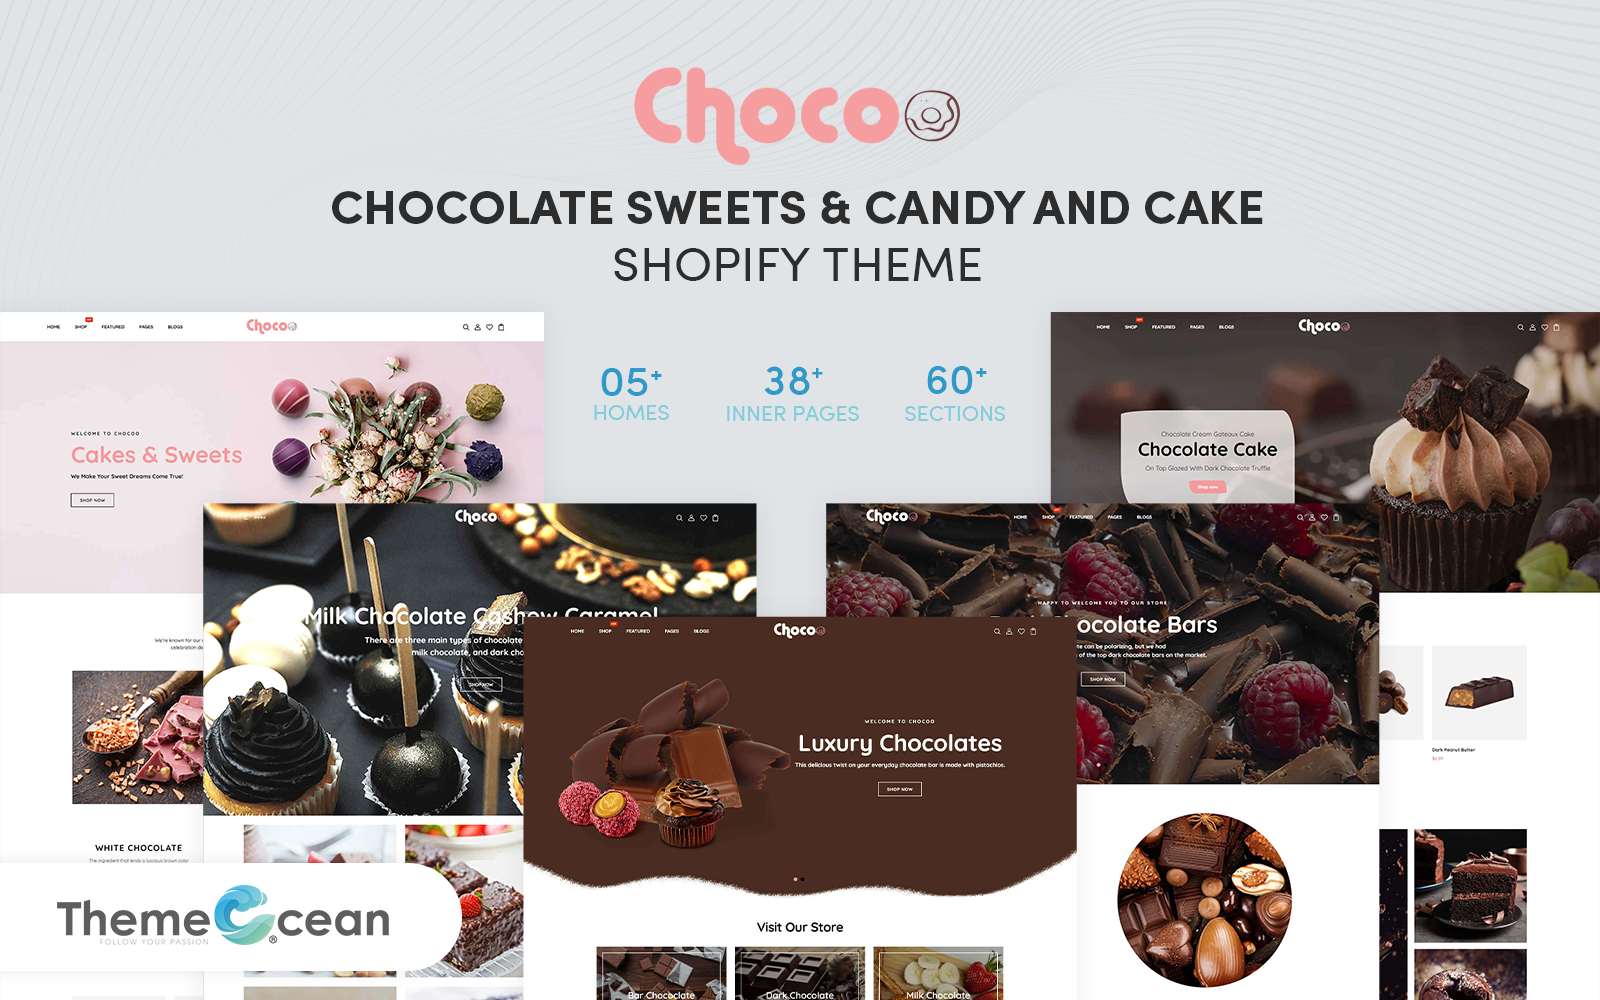 Chocoo - Chocolate Sweets & Candy And Cake Shopify Theme